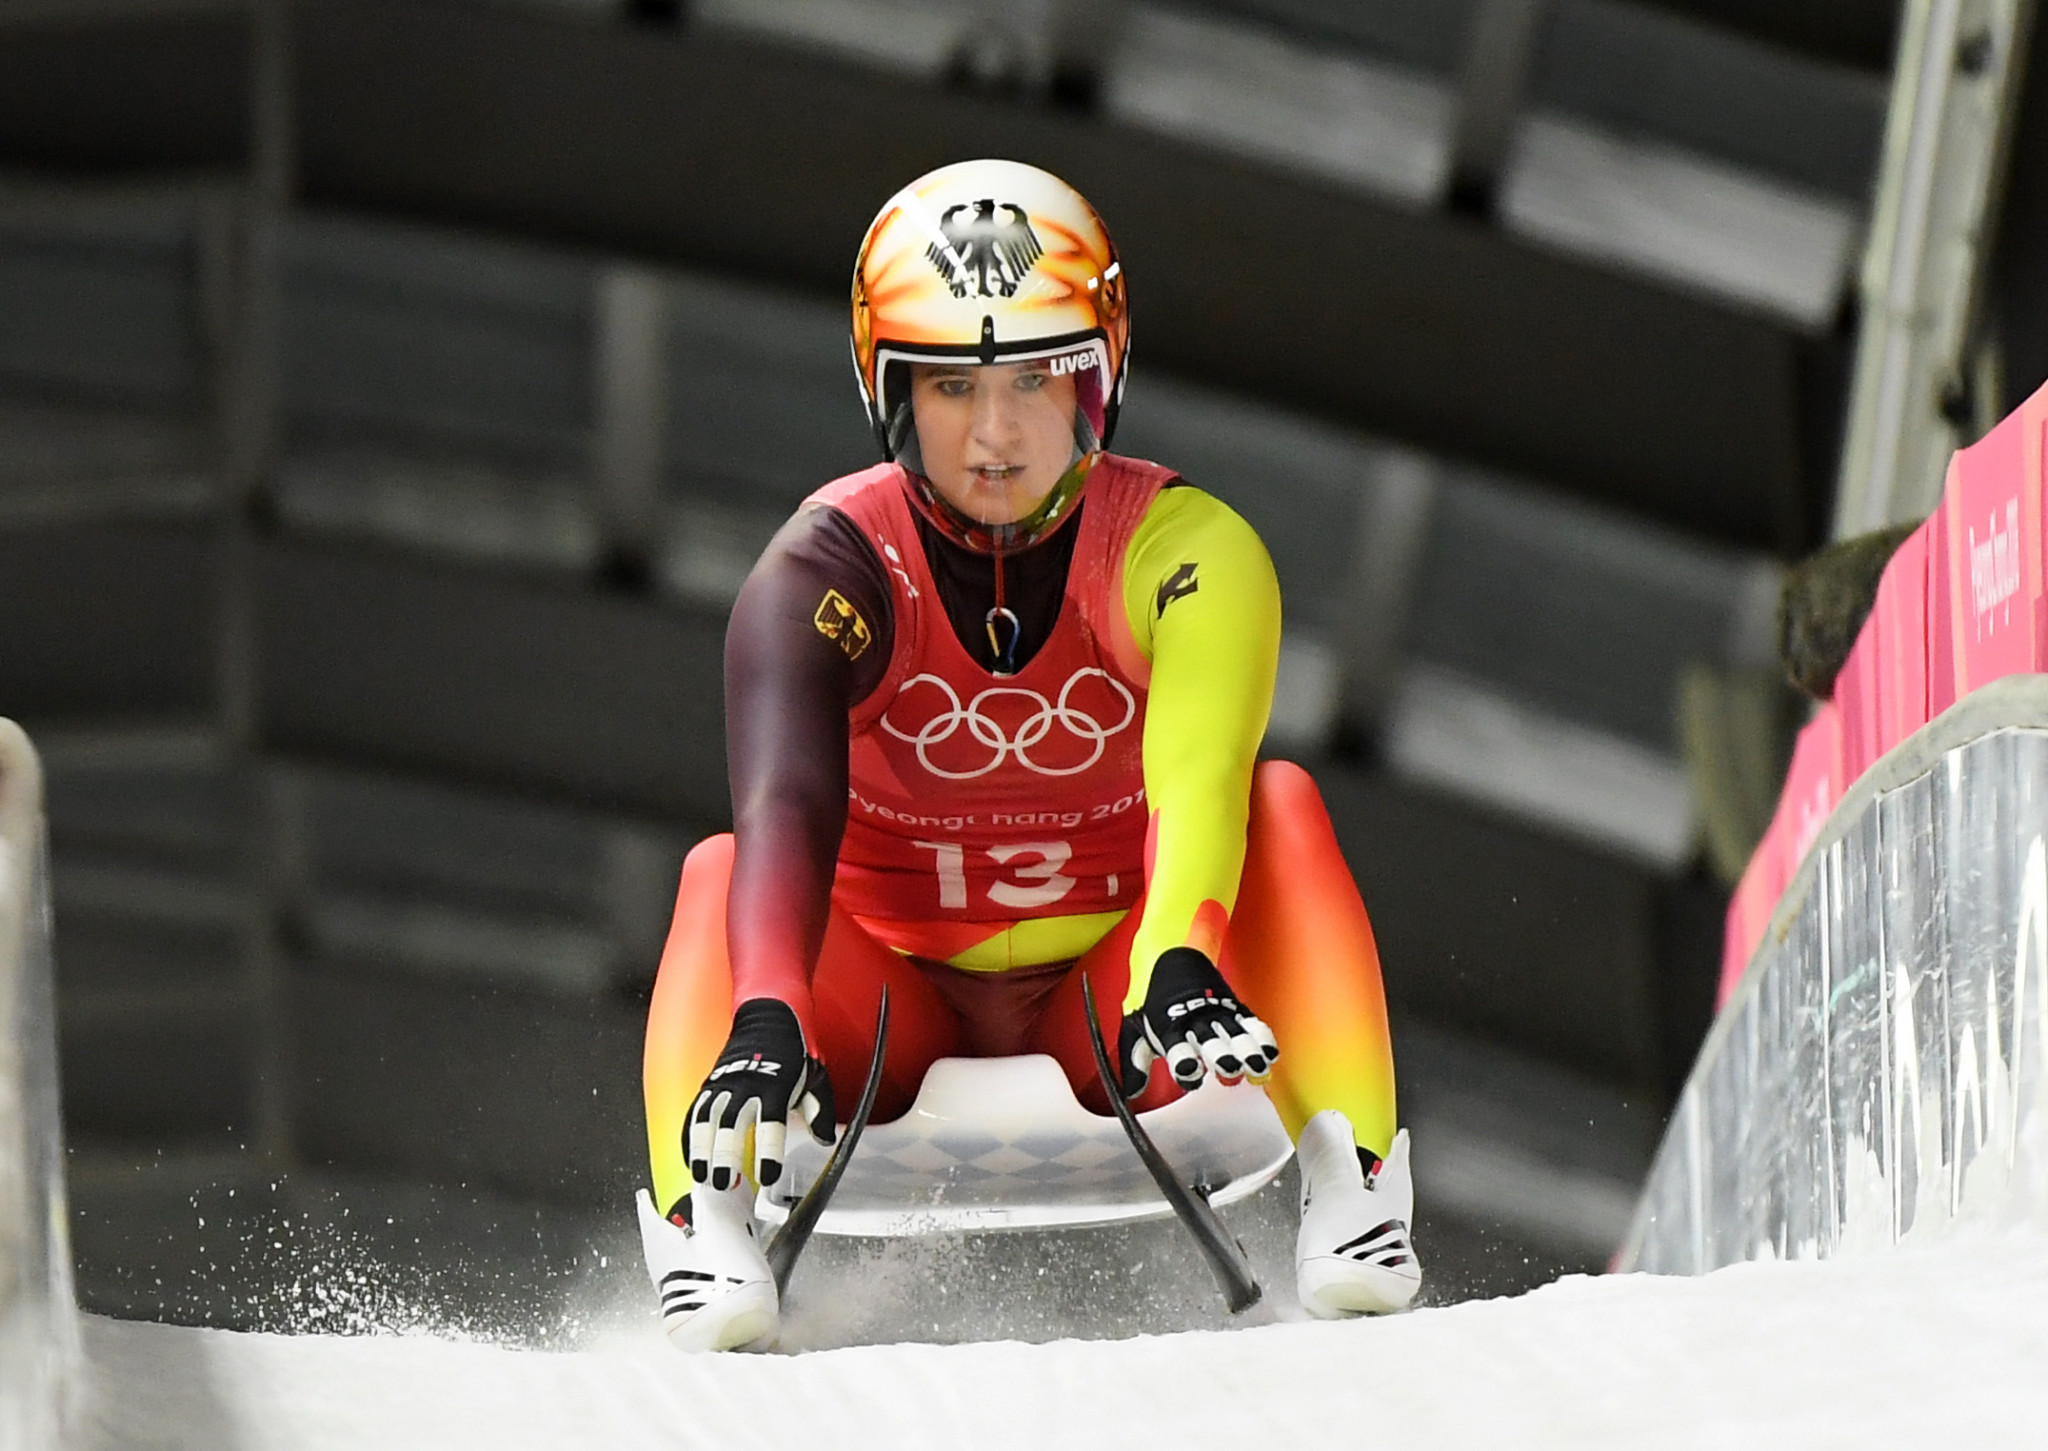 German skeleton racer Natalie Geisenberger spoke out against against treatment from organisers after attending a Beijing 2022 test event in November ©Getty Images